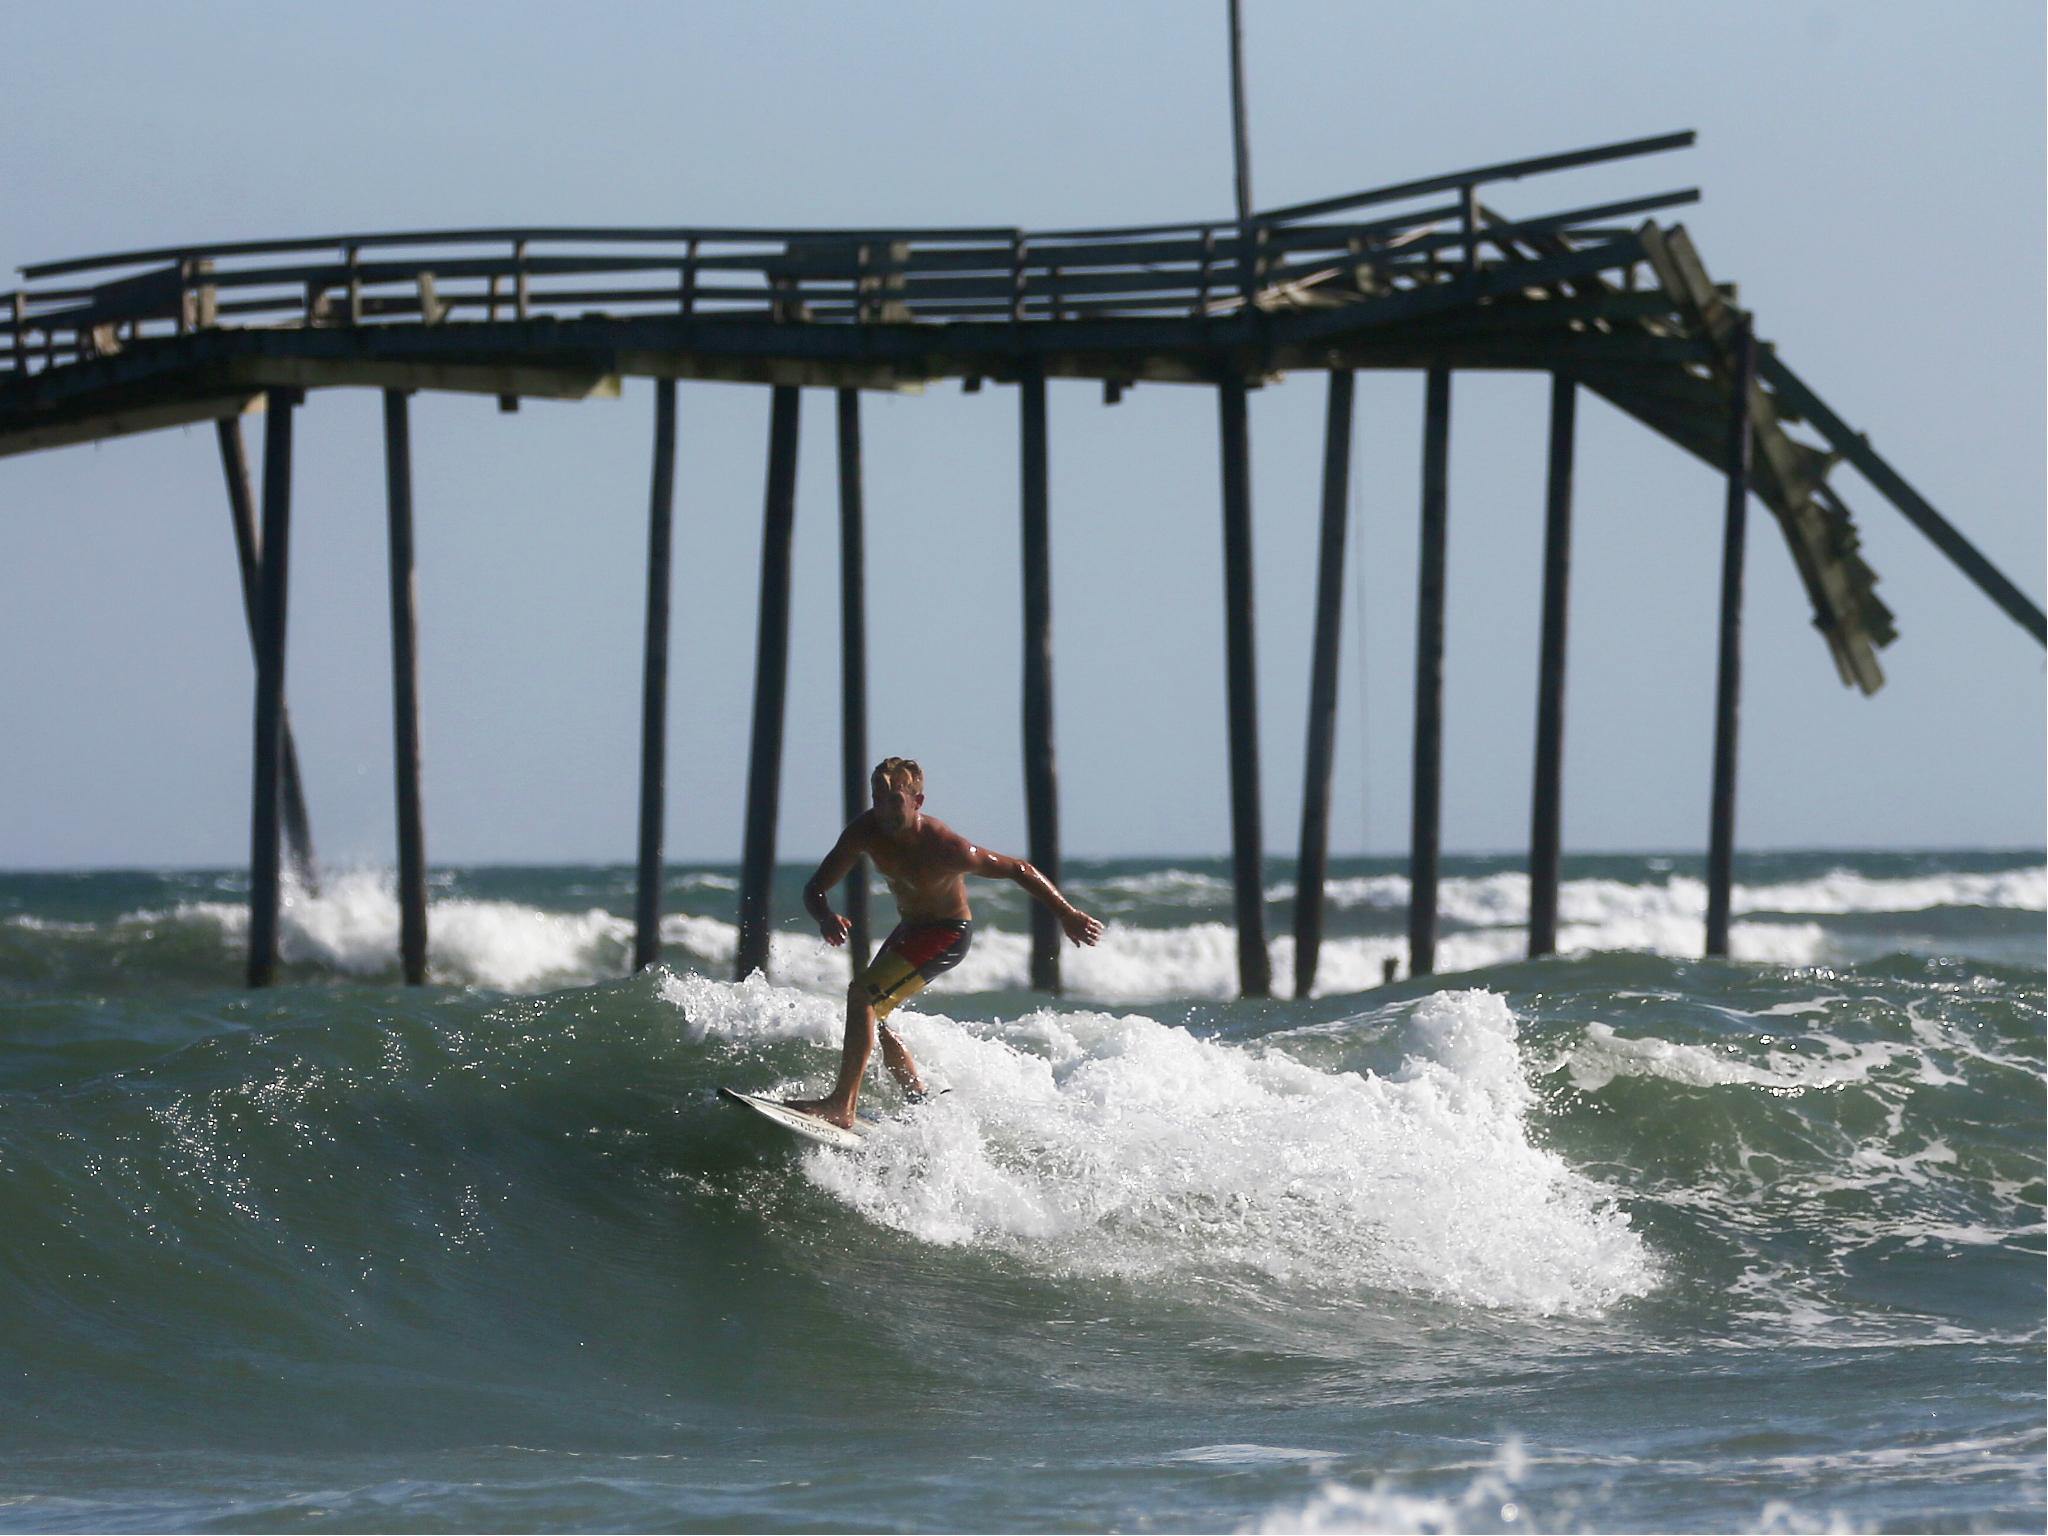 A man surfs near Cape Hatteras in Outer Banks, North Carolina where a new island has formed and storms are common